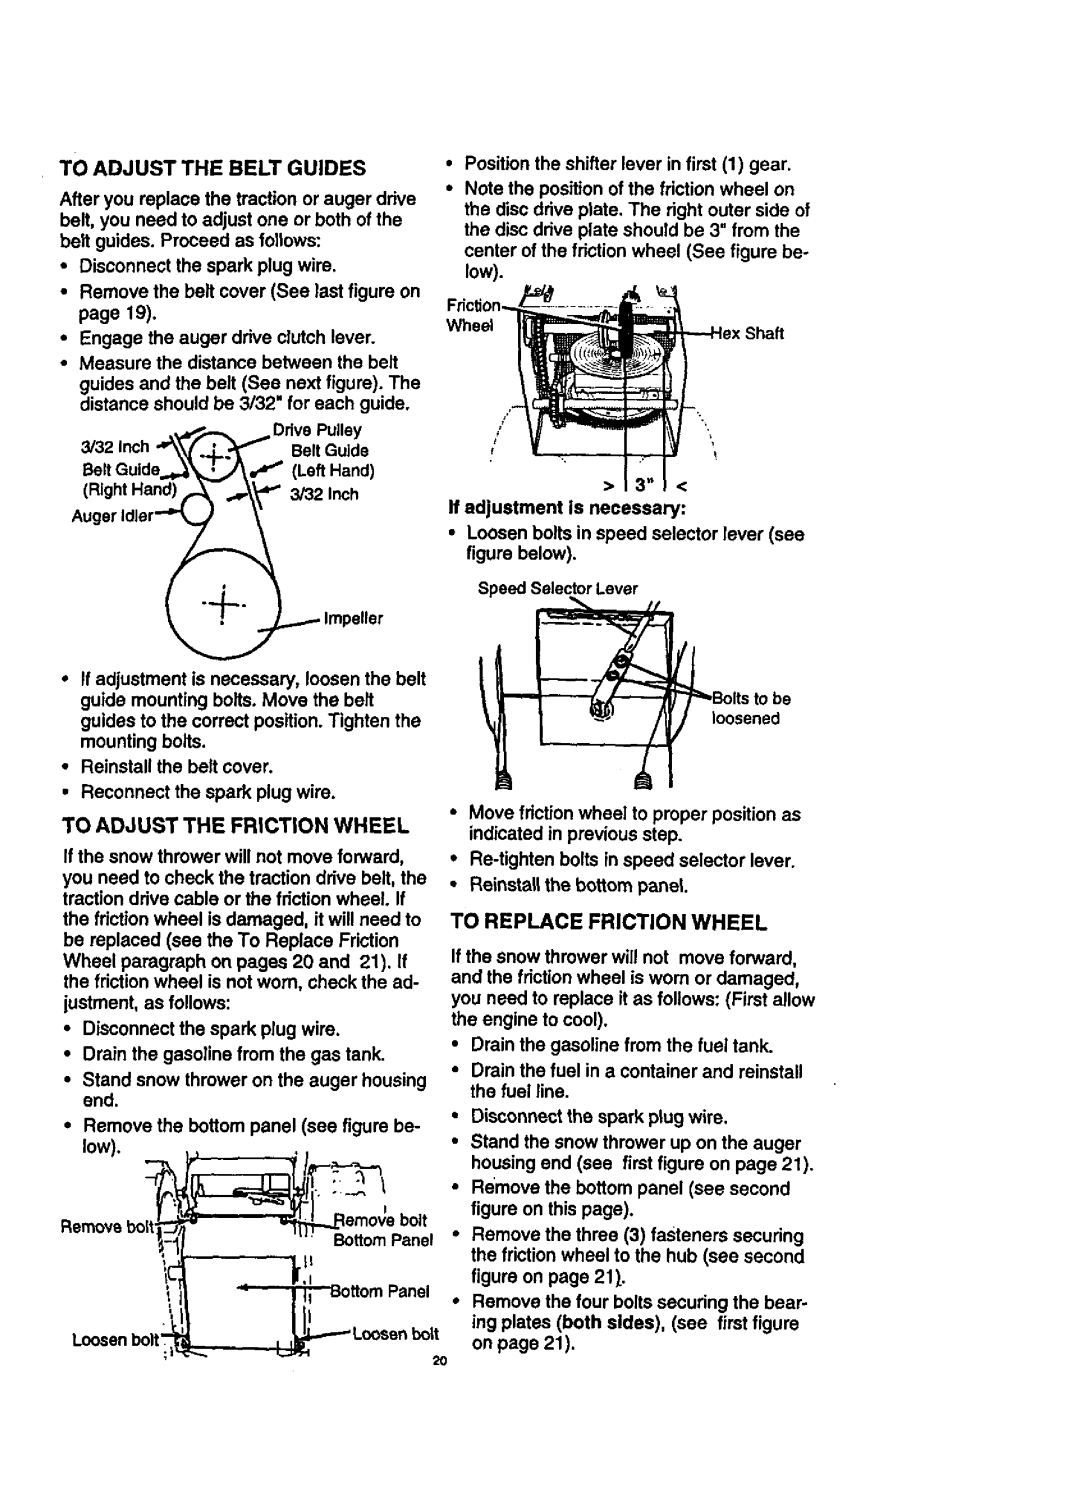 Craftsman 536.8884 manual To Adjust The Belt Guides, To Adjust The Friction Wheel, To Replace Friction Wheel 